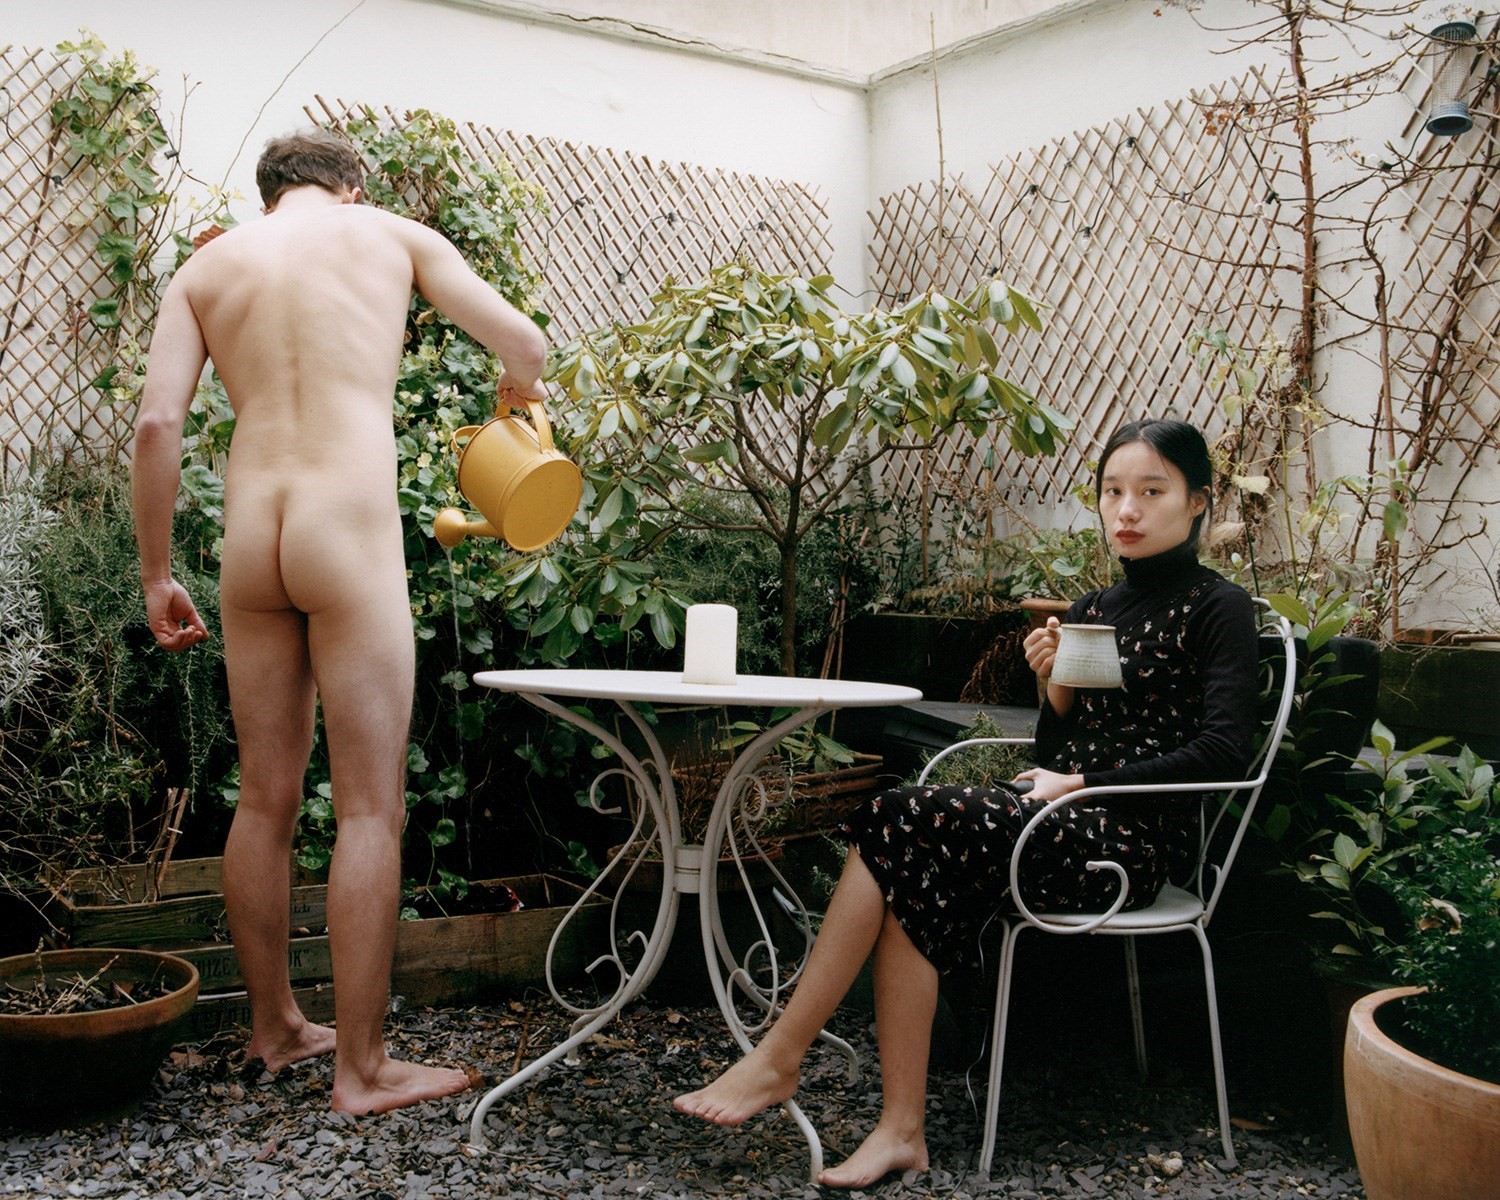 The Greatest Photographs of 2022: Depictions of Sexuality and the Physique